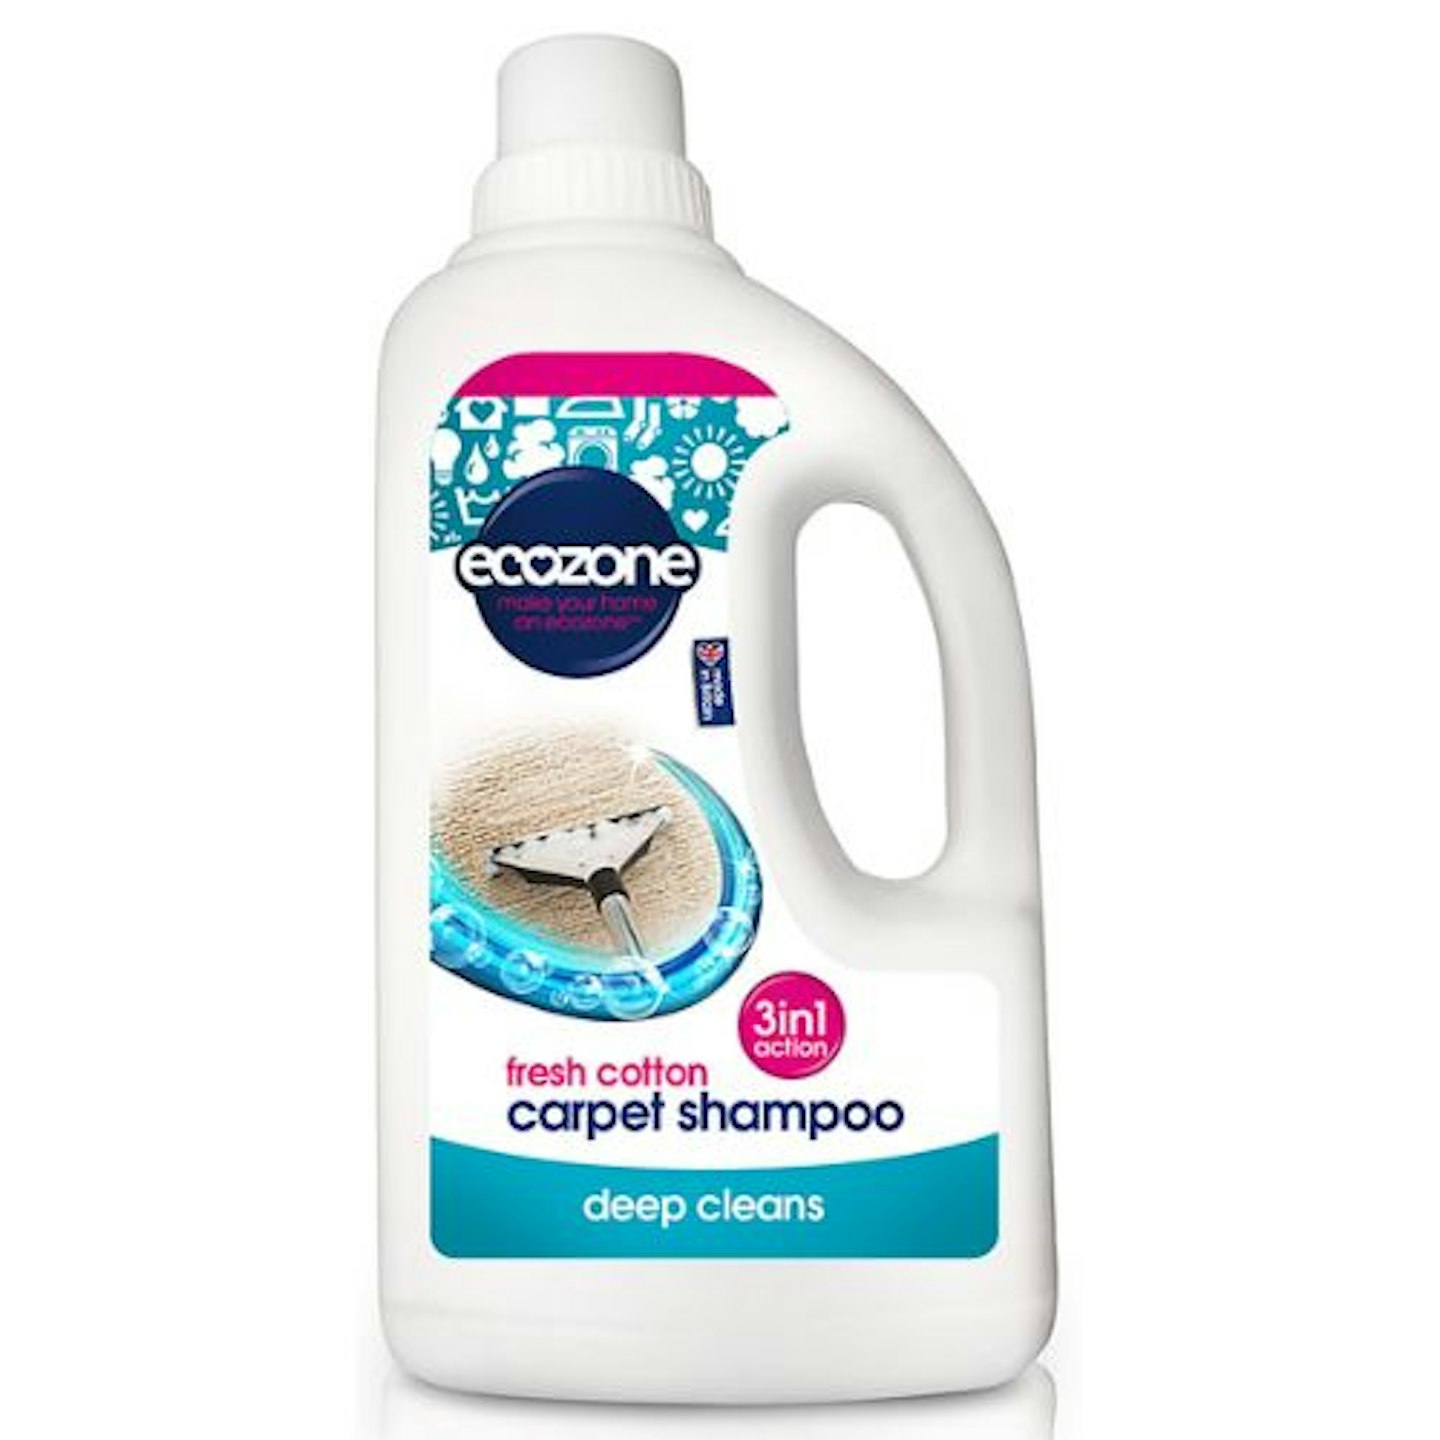 best-eco-friendly-cleaning-products-ecozone-carpet-shampoo